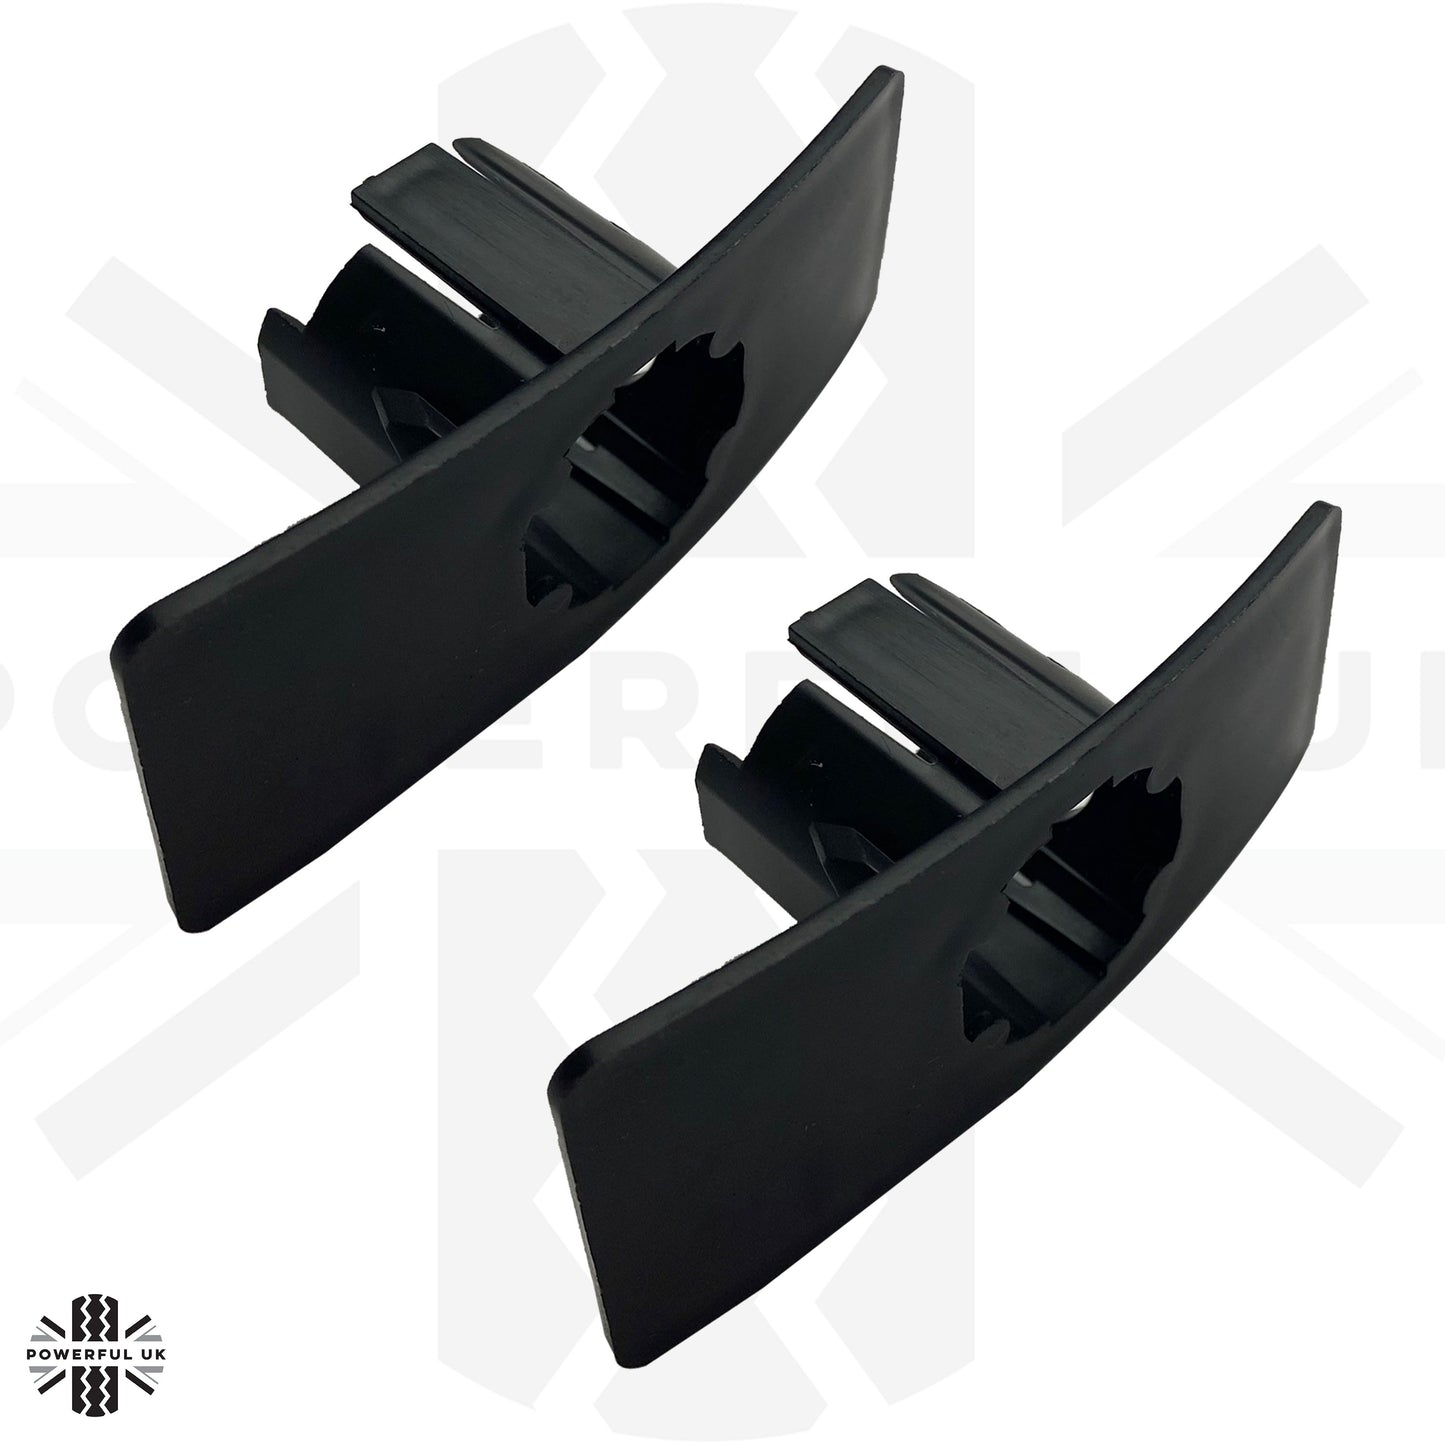 Genuine Parking Sensor Holders for Front Bumper for Discovery 4 - Pair